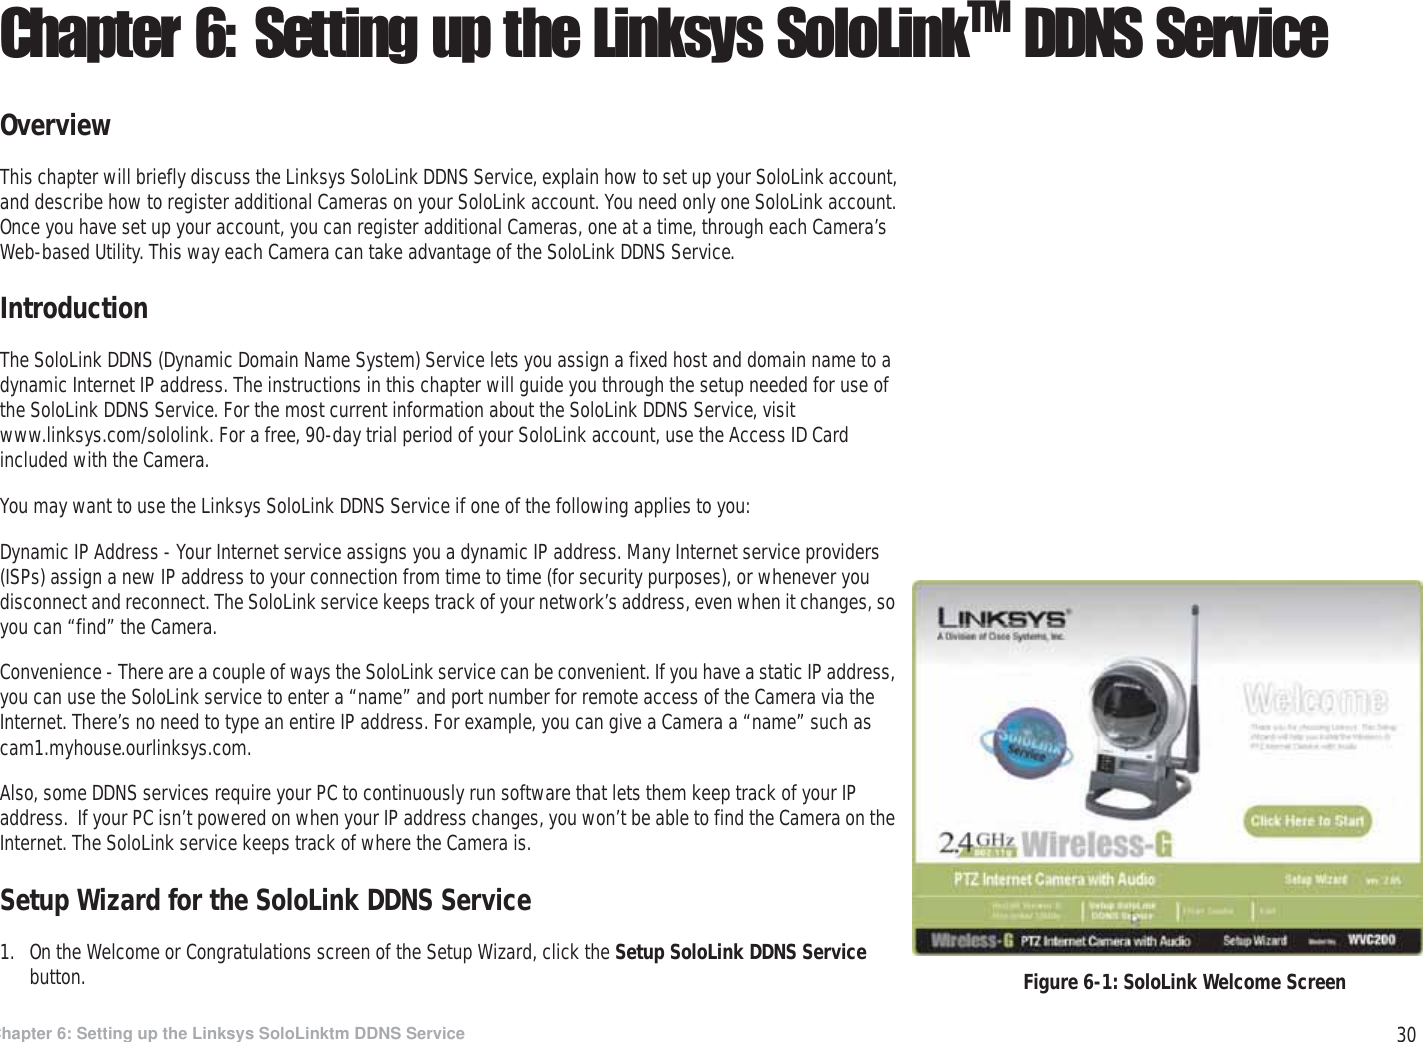 30Chapter 6: Setting up the Linksys SoloLinktm DDNS ServiceOverviewWireless-G PTZ Internet Camera with AudioChapter 6: Setting up the Linksys SoloLinkTM DDNS ServiceOverviewThis chapter will briefly discuss the Linksys SoloLink DDNS Service, explain how to set up your SoloLink account, and describe how to register additional Cameras on your SoloLink account. You need only one SoloLink account. Once you have set up your account, you can register additional Cameras, one at a time, through each Camera’s Web-based Utility. This way each Camera can take advantage of the SoloLink DDNS Service.IntroductionThe SoloLink DDNS (Dynamic Domain Name System) Service lets you assign a fixed host and domain name to a dynamic Internet IP address. The instructions in this chapter will guide you through the setup needed for use of the SoloLink DDNS Service. For the most current information about the SoloLink DDNS Service, visit www.linksys.com/sololink. For a free, 90-day trial period of your SoloLink account, use the Access ID Card included with the Camera.You may want to use the Linksys SoloLink DDNS Service if one of the following applies to you:Dynamic IP Address - Your Internet service assigns you a dynamic IP address. Many Internet service providers (ISPs) assign a new IP address to your connection from time to time (for security purposes), or whenever you disconnect and reconnect. The SoloLink service keeps track of your network’s address, even when it changes, so you can “find” the Camera.Convenience - There are a couple of ways the SoloLink service can be convenient. If you have a static IP address, you can use the SoloLink service to enter a “name” and port number for remote access of the Camera via the Internet. There’s no need to type an entire IP address. For example, you can give a Camera a “name” such as cam1.myhouse.ourlinksys.com.Also, some DDNS services require your PC to continuously run software that lets them keep track of your IP address.  If your PC isn’t powered on when your IP address changes, you won’t be able to find the Camera on the Internet. The SoloLink service keeps track of where the Camera is.Setup Wizard for the SoloLink DDNS Service1. On the Welcome or Congratulations screen of the Setup Wizard, click the Setup SoloLink DDNS Service button.  Figure 6-1: SoloLink Welcome Screen